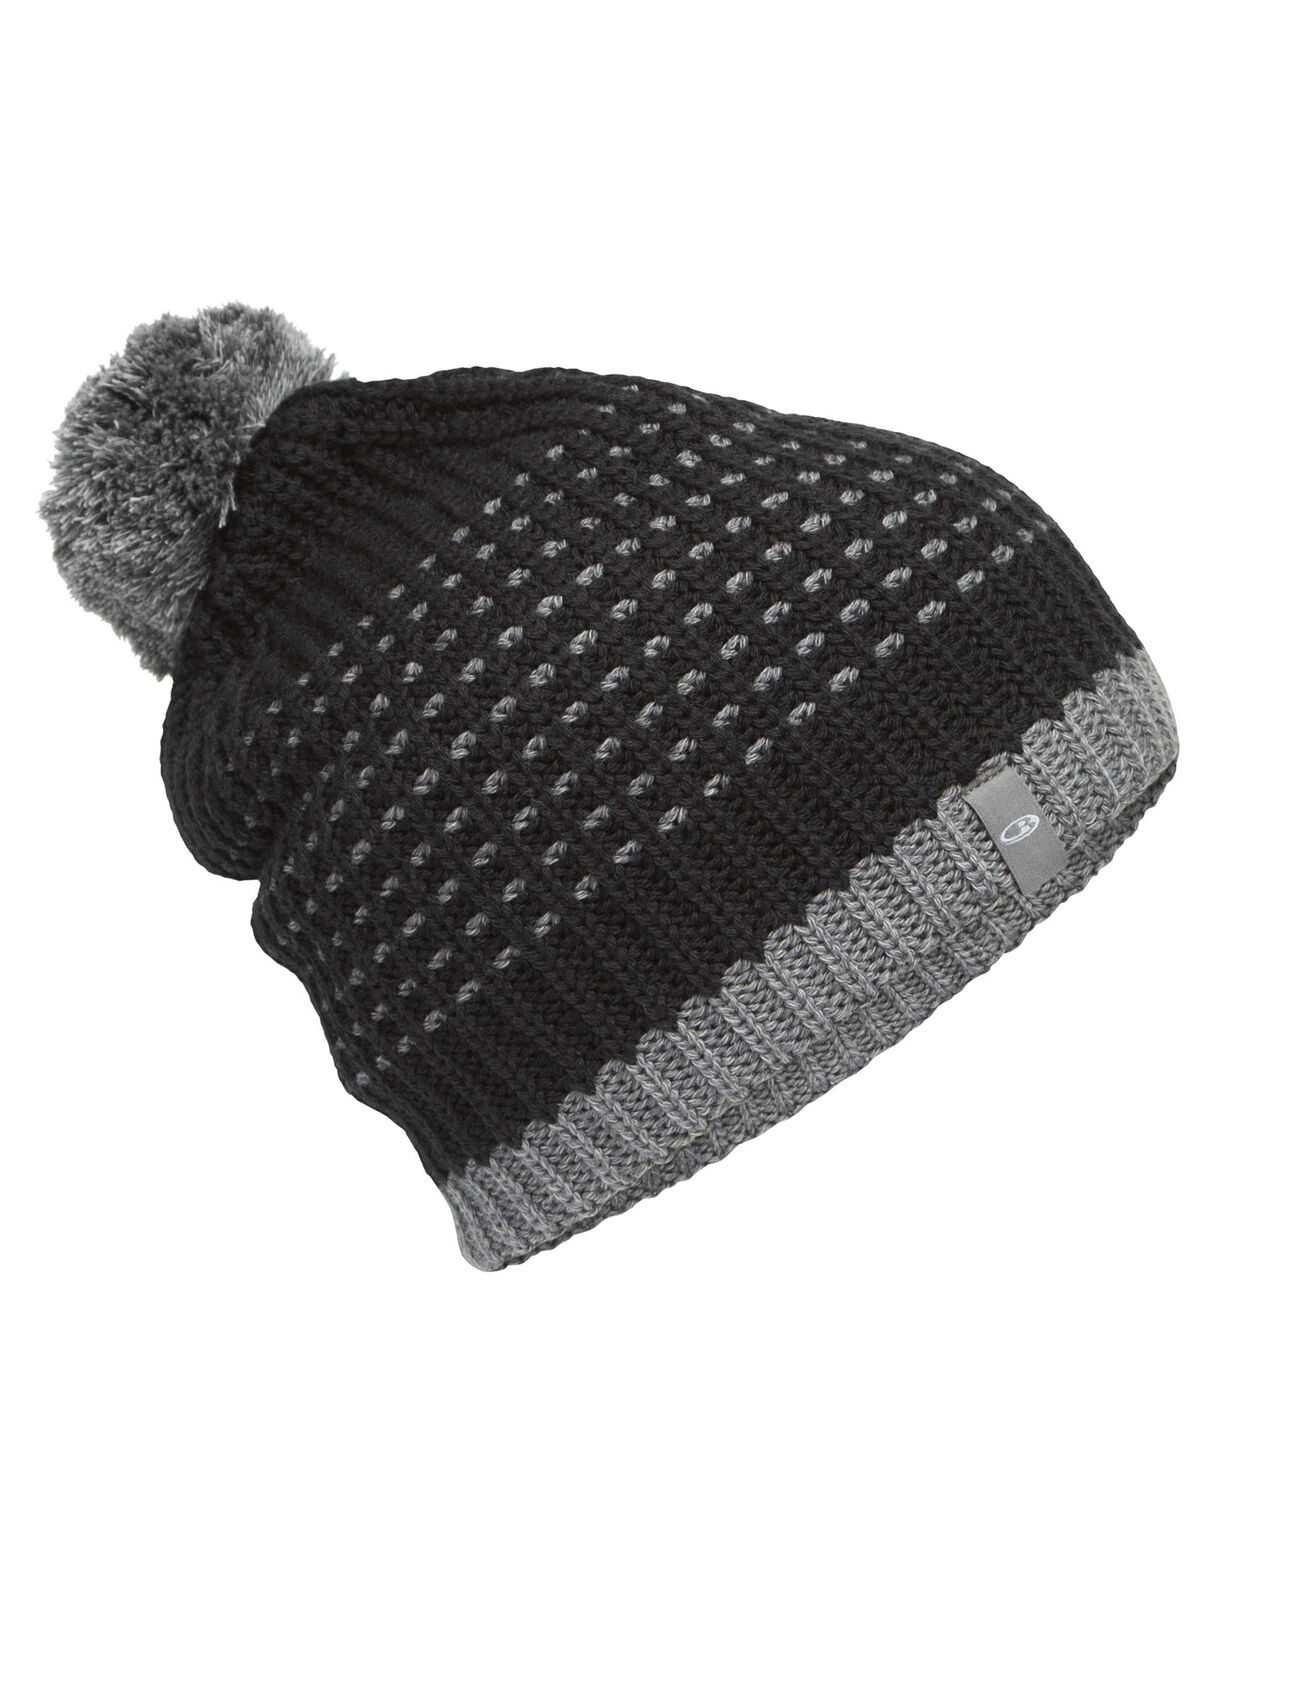 Unisex Merino Affinity Pom Beanie  Made with a sustainable blend of merino wool and organic cotton, our Affinity Pom Beanie provides natural warmth with a soft, 100% merino wool lining for added comfort. 